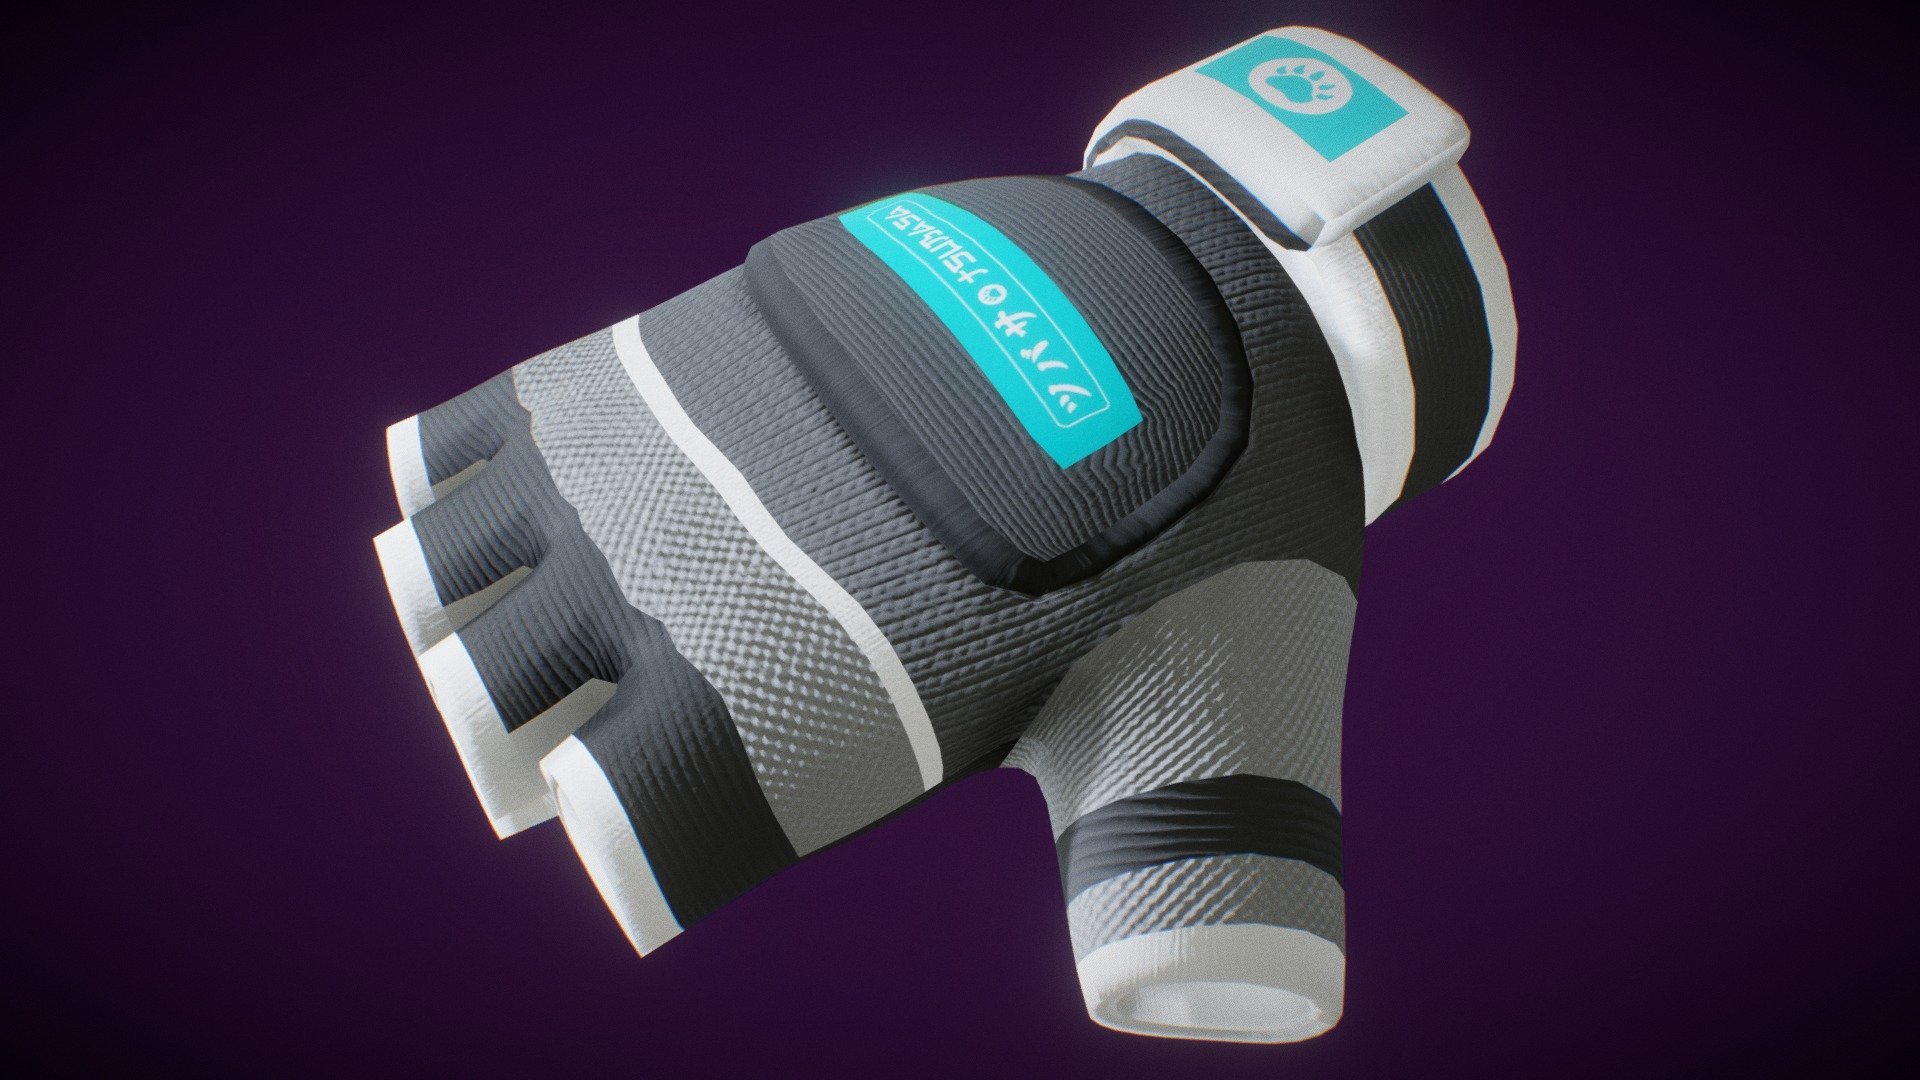 Gorgeous and stylish textured fingerless gloves. Color can be easily customized through materials. The model is UV mapped ready to add your own custom logo or design on the highlighted labels or across all the gloves through texture maps. Topology is also ready for rigging and animation!. 

Position, size and thickness are ready to be a &ldquo;plug n play